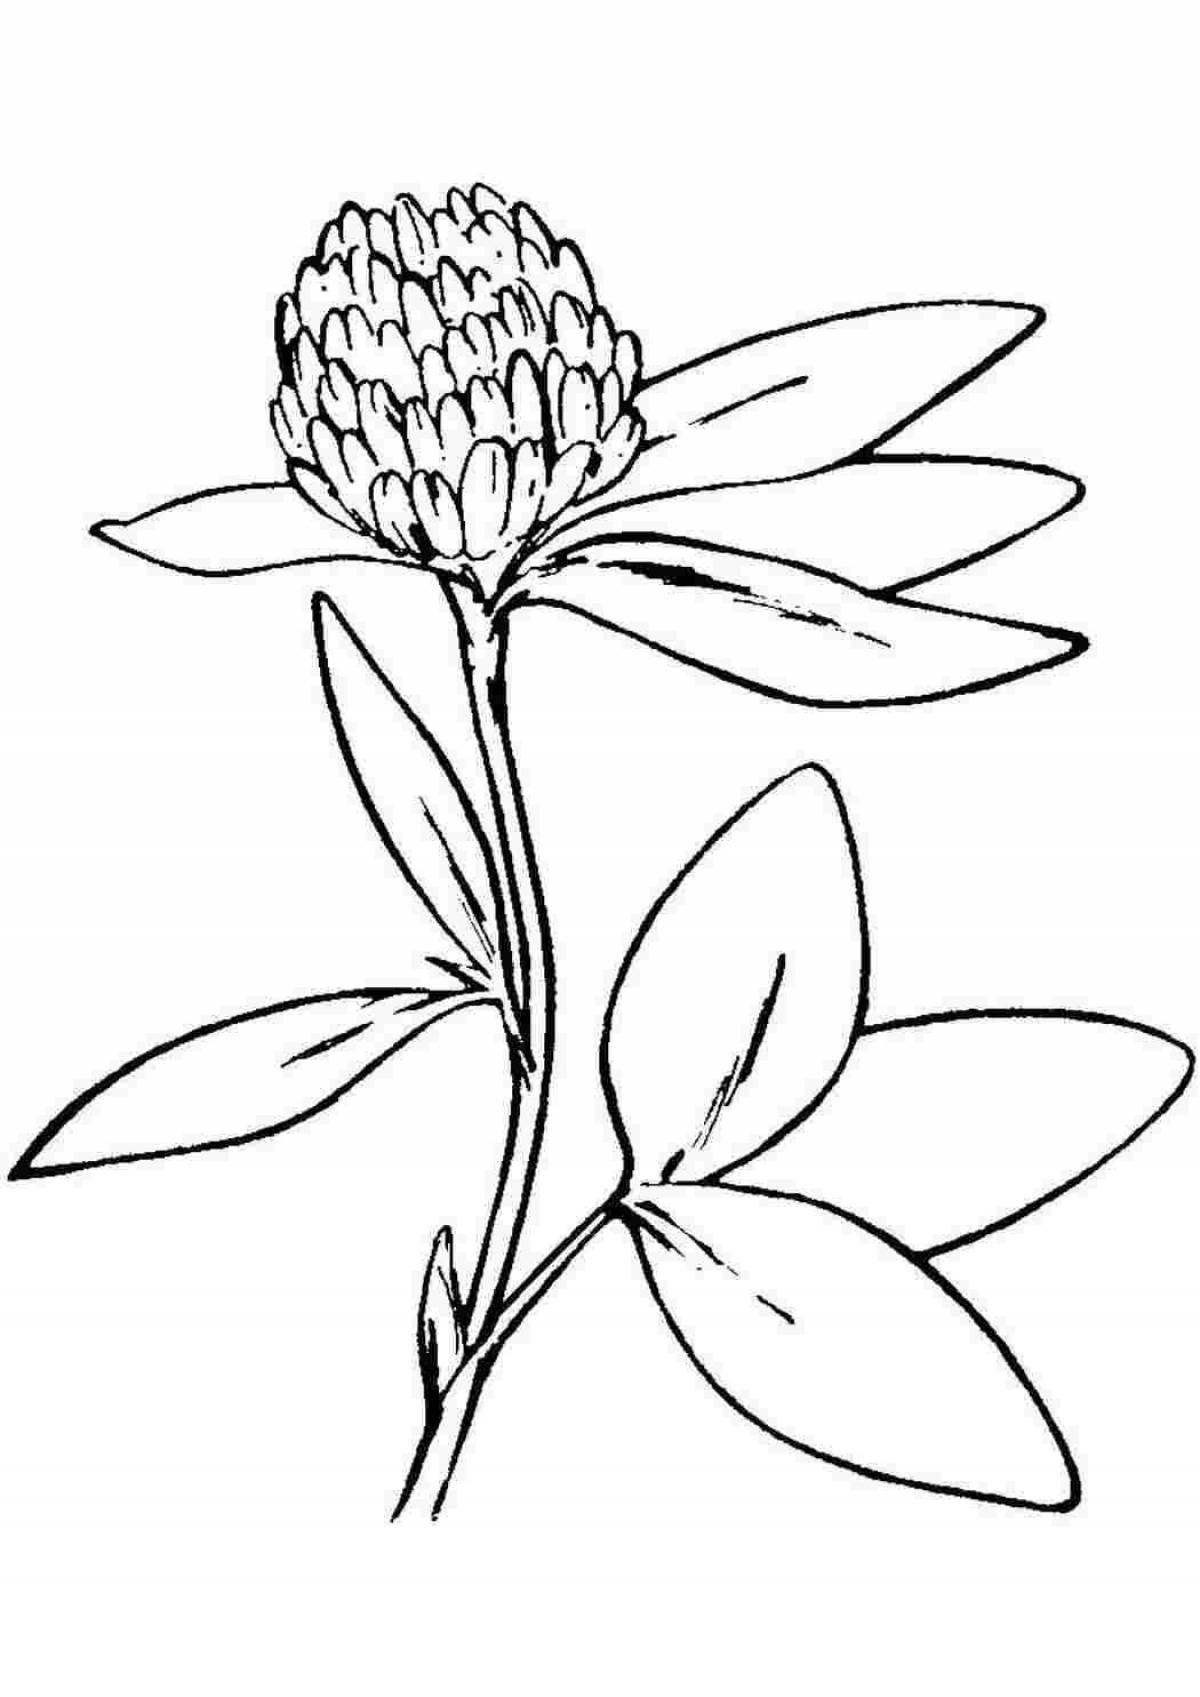 Amazing wild plant coloring pages